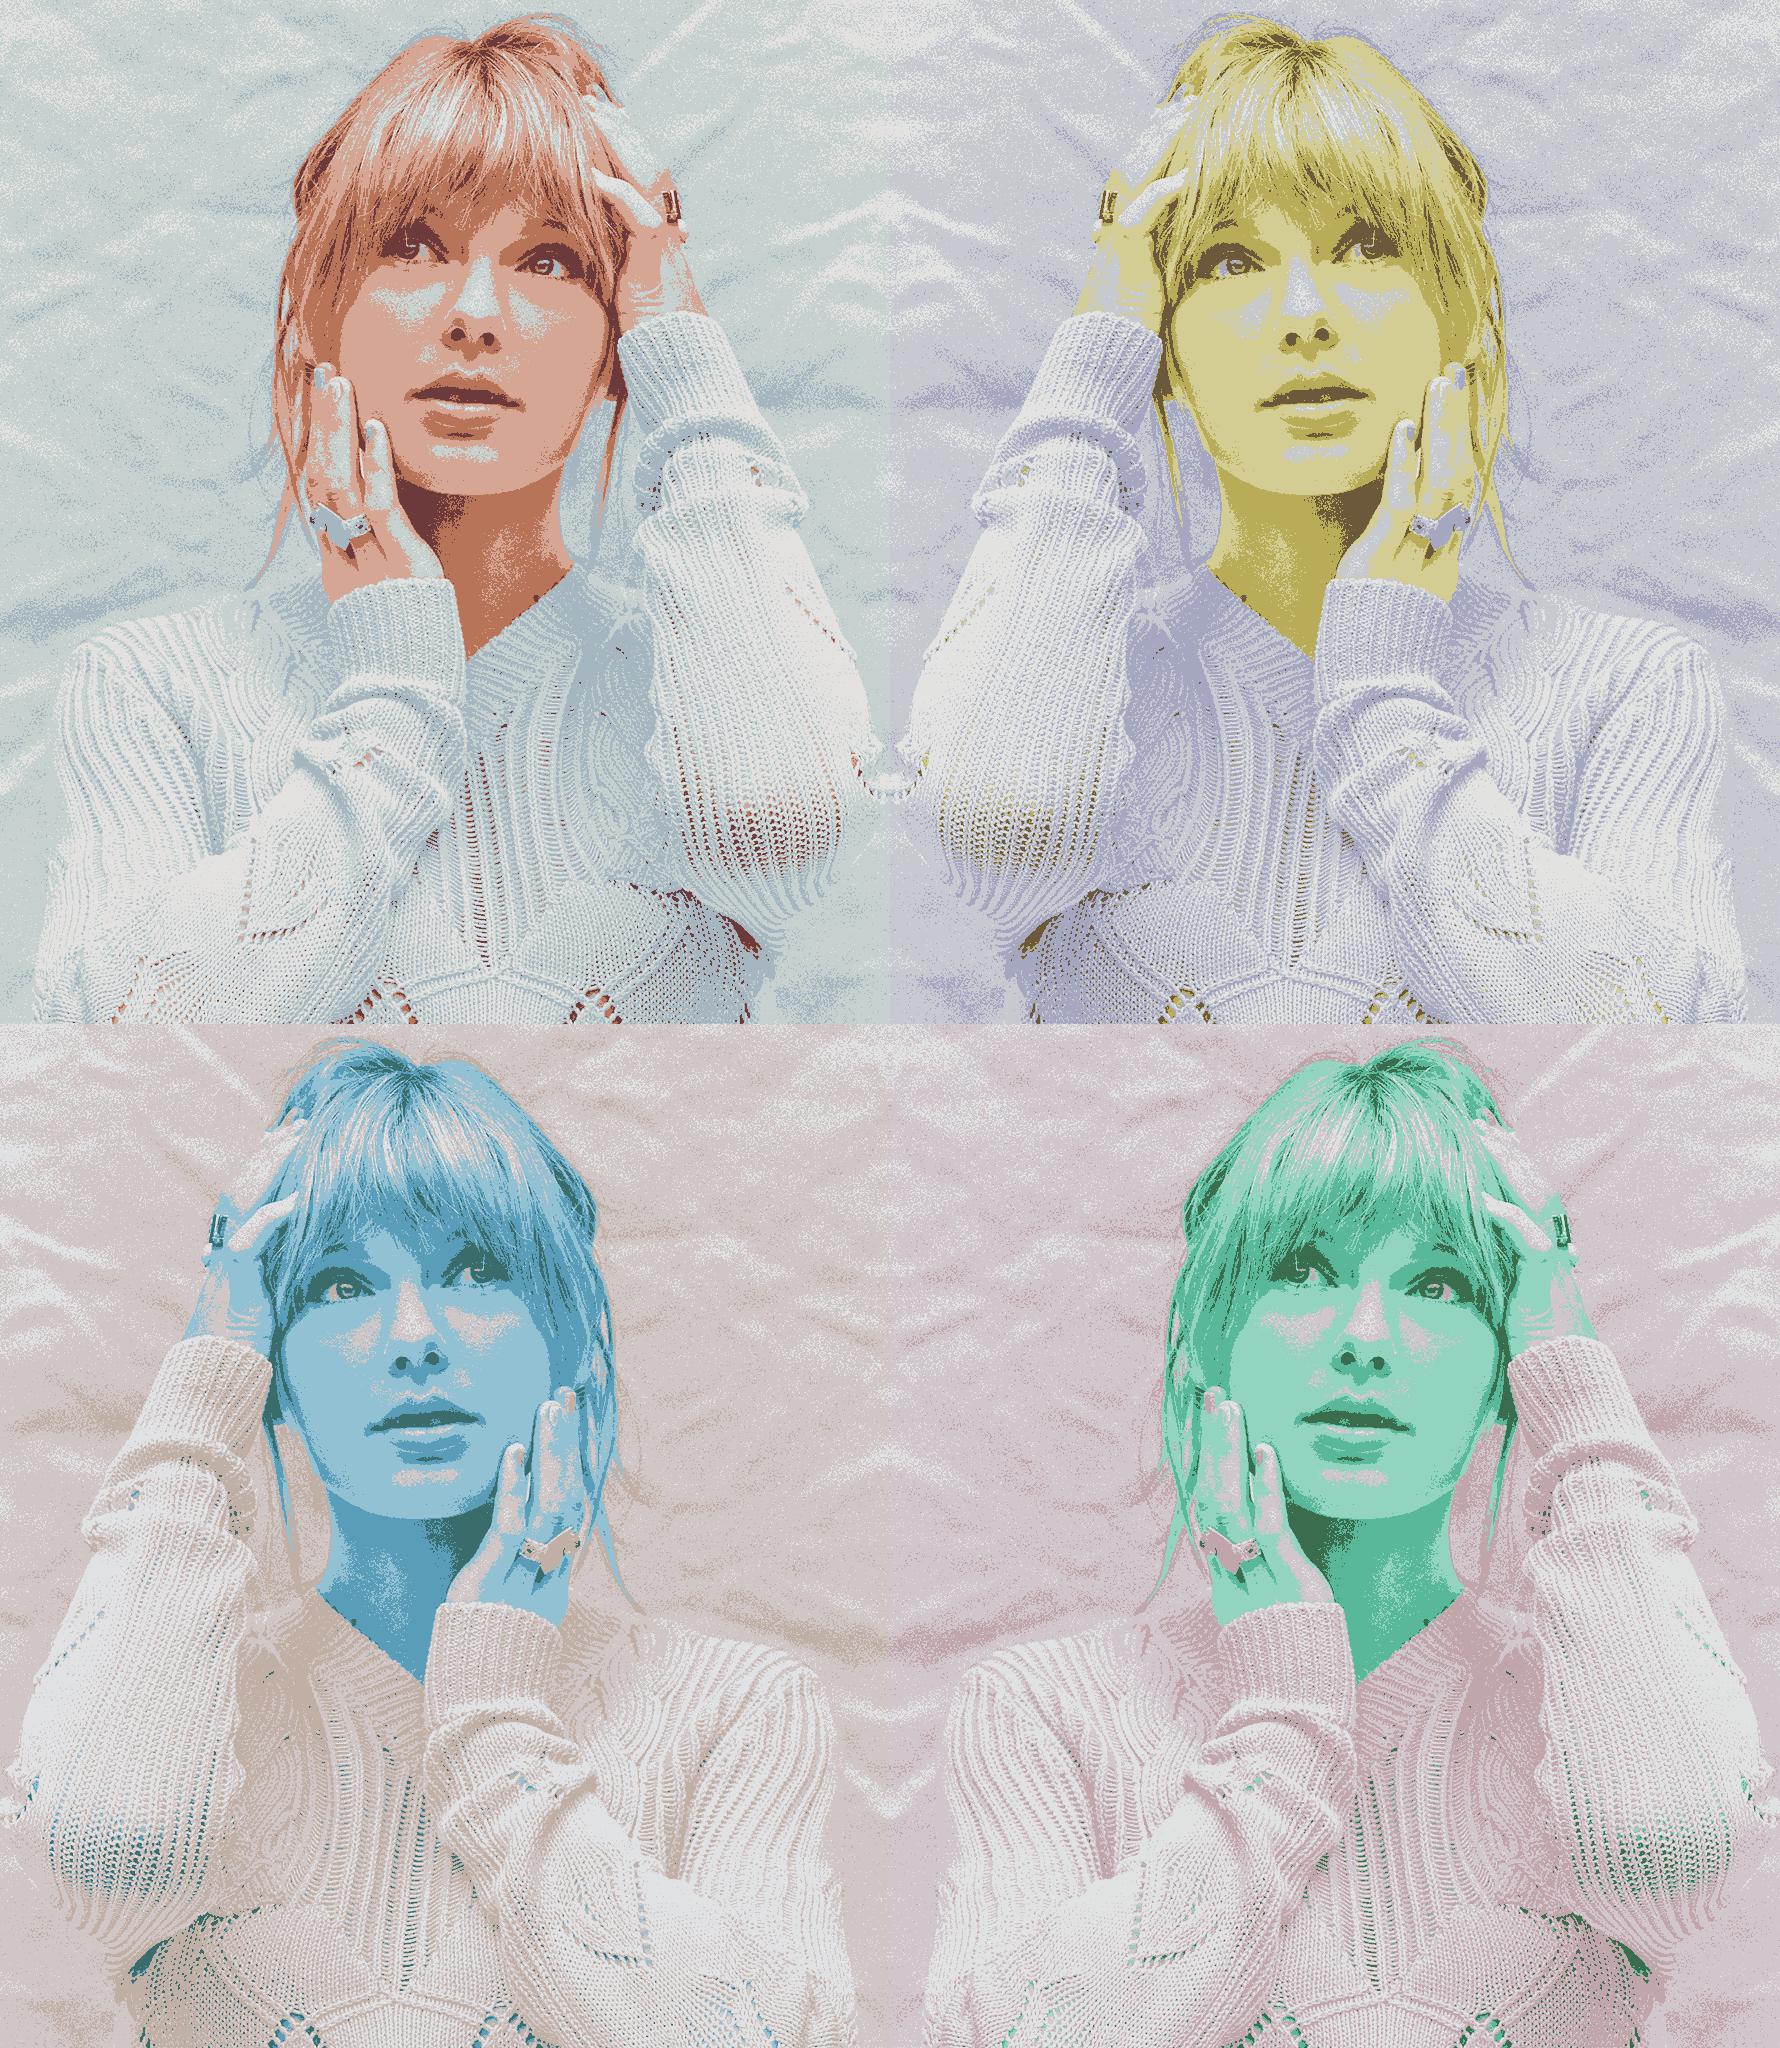 A picture of Taylor Swift inspired by Andy Warhol